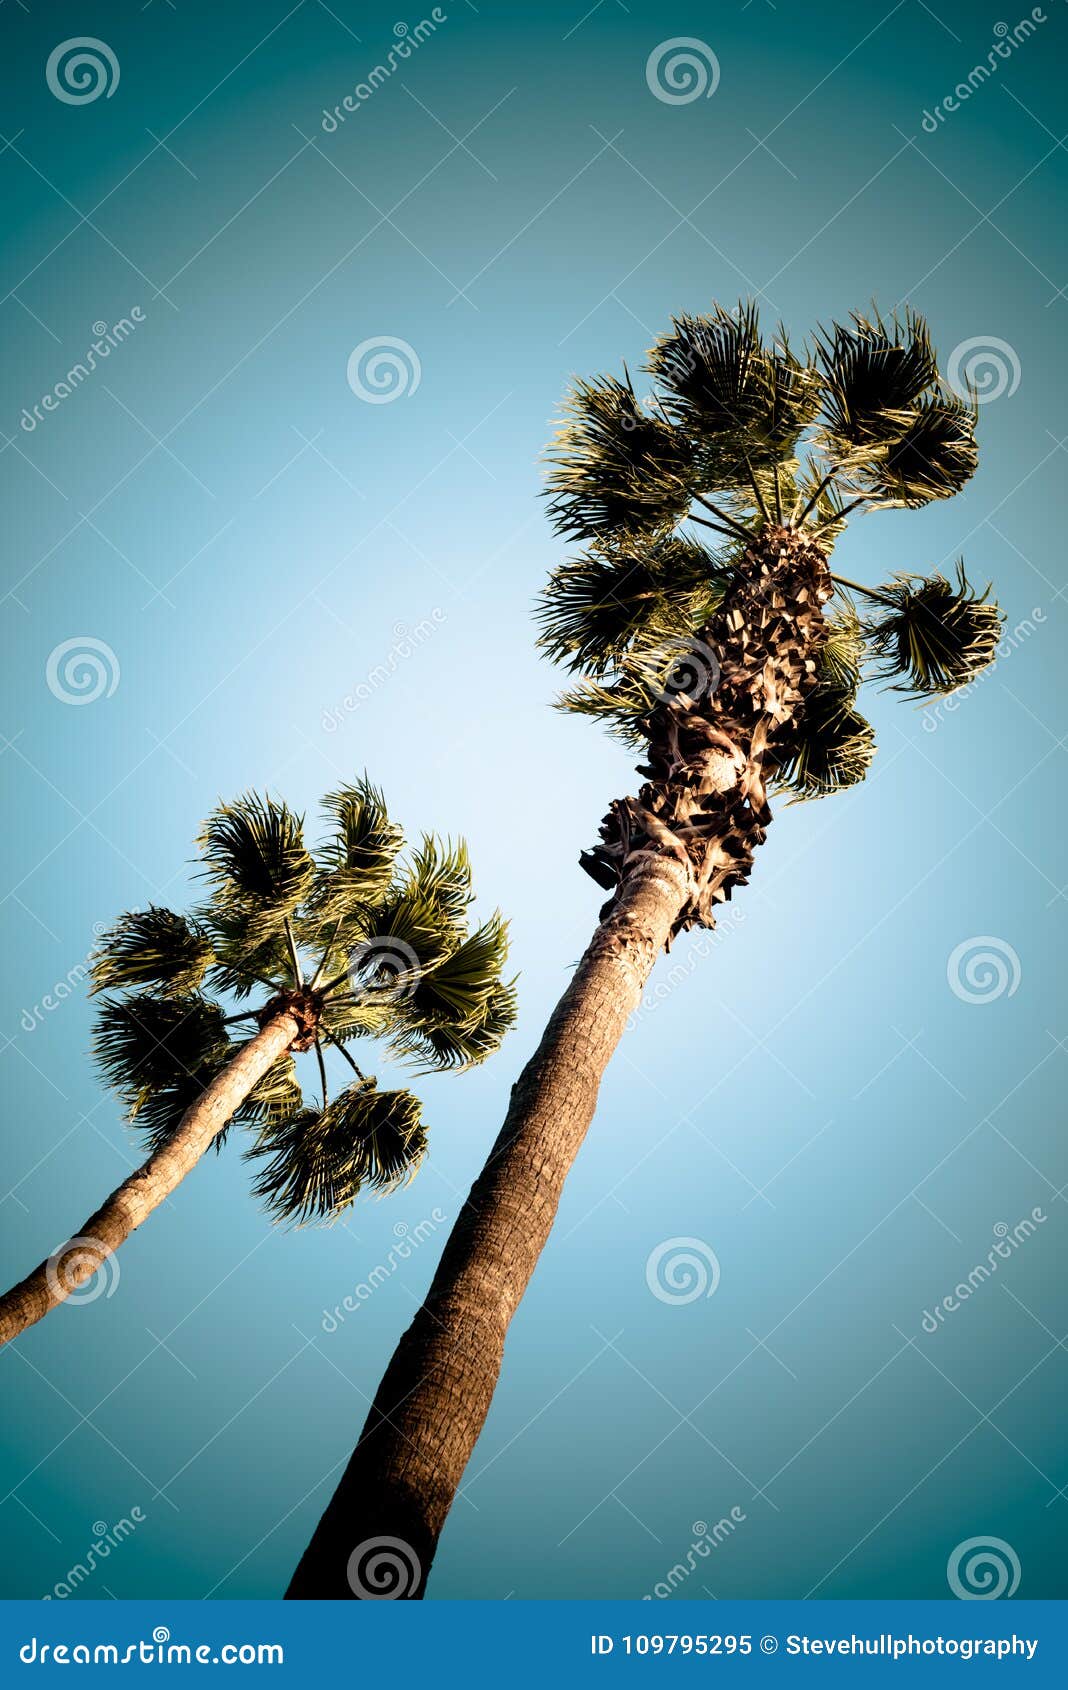 summer palms in southern california